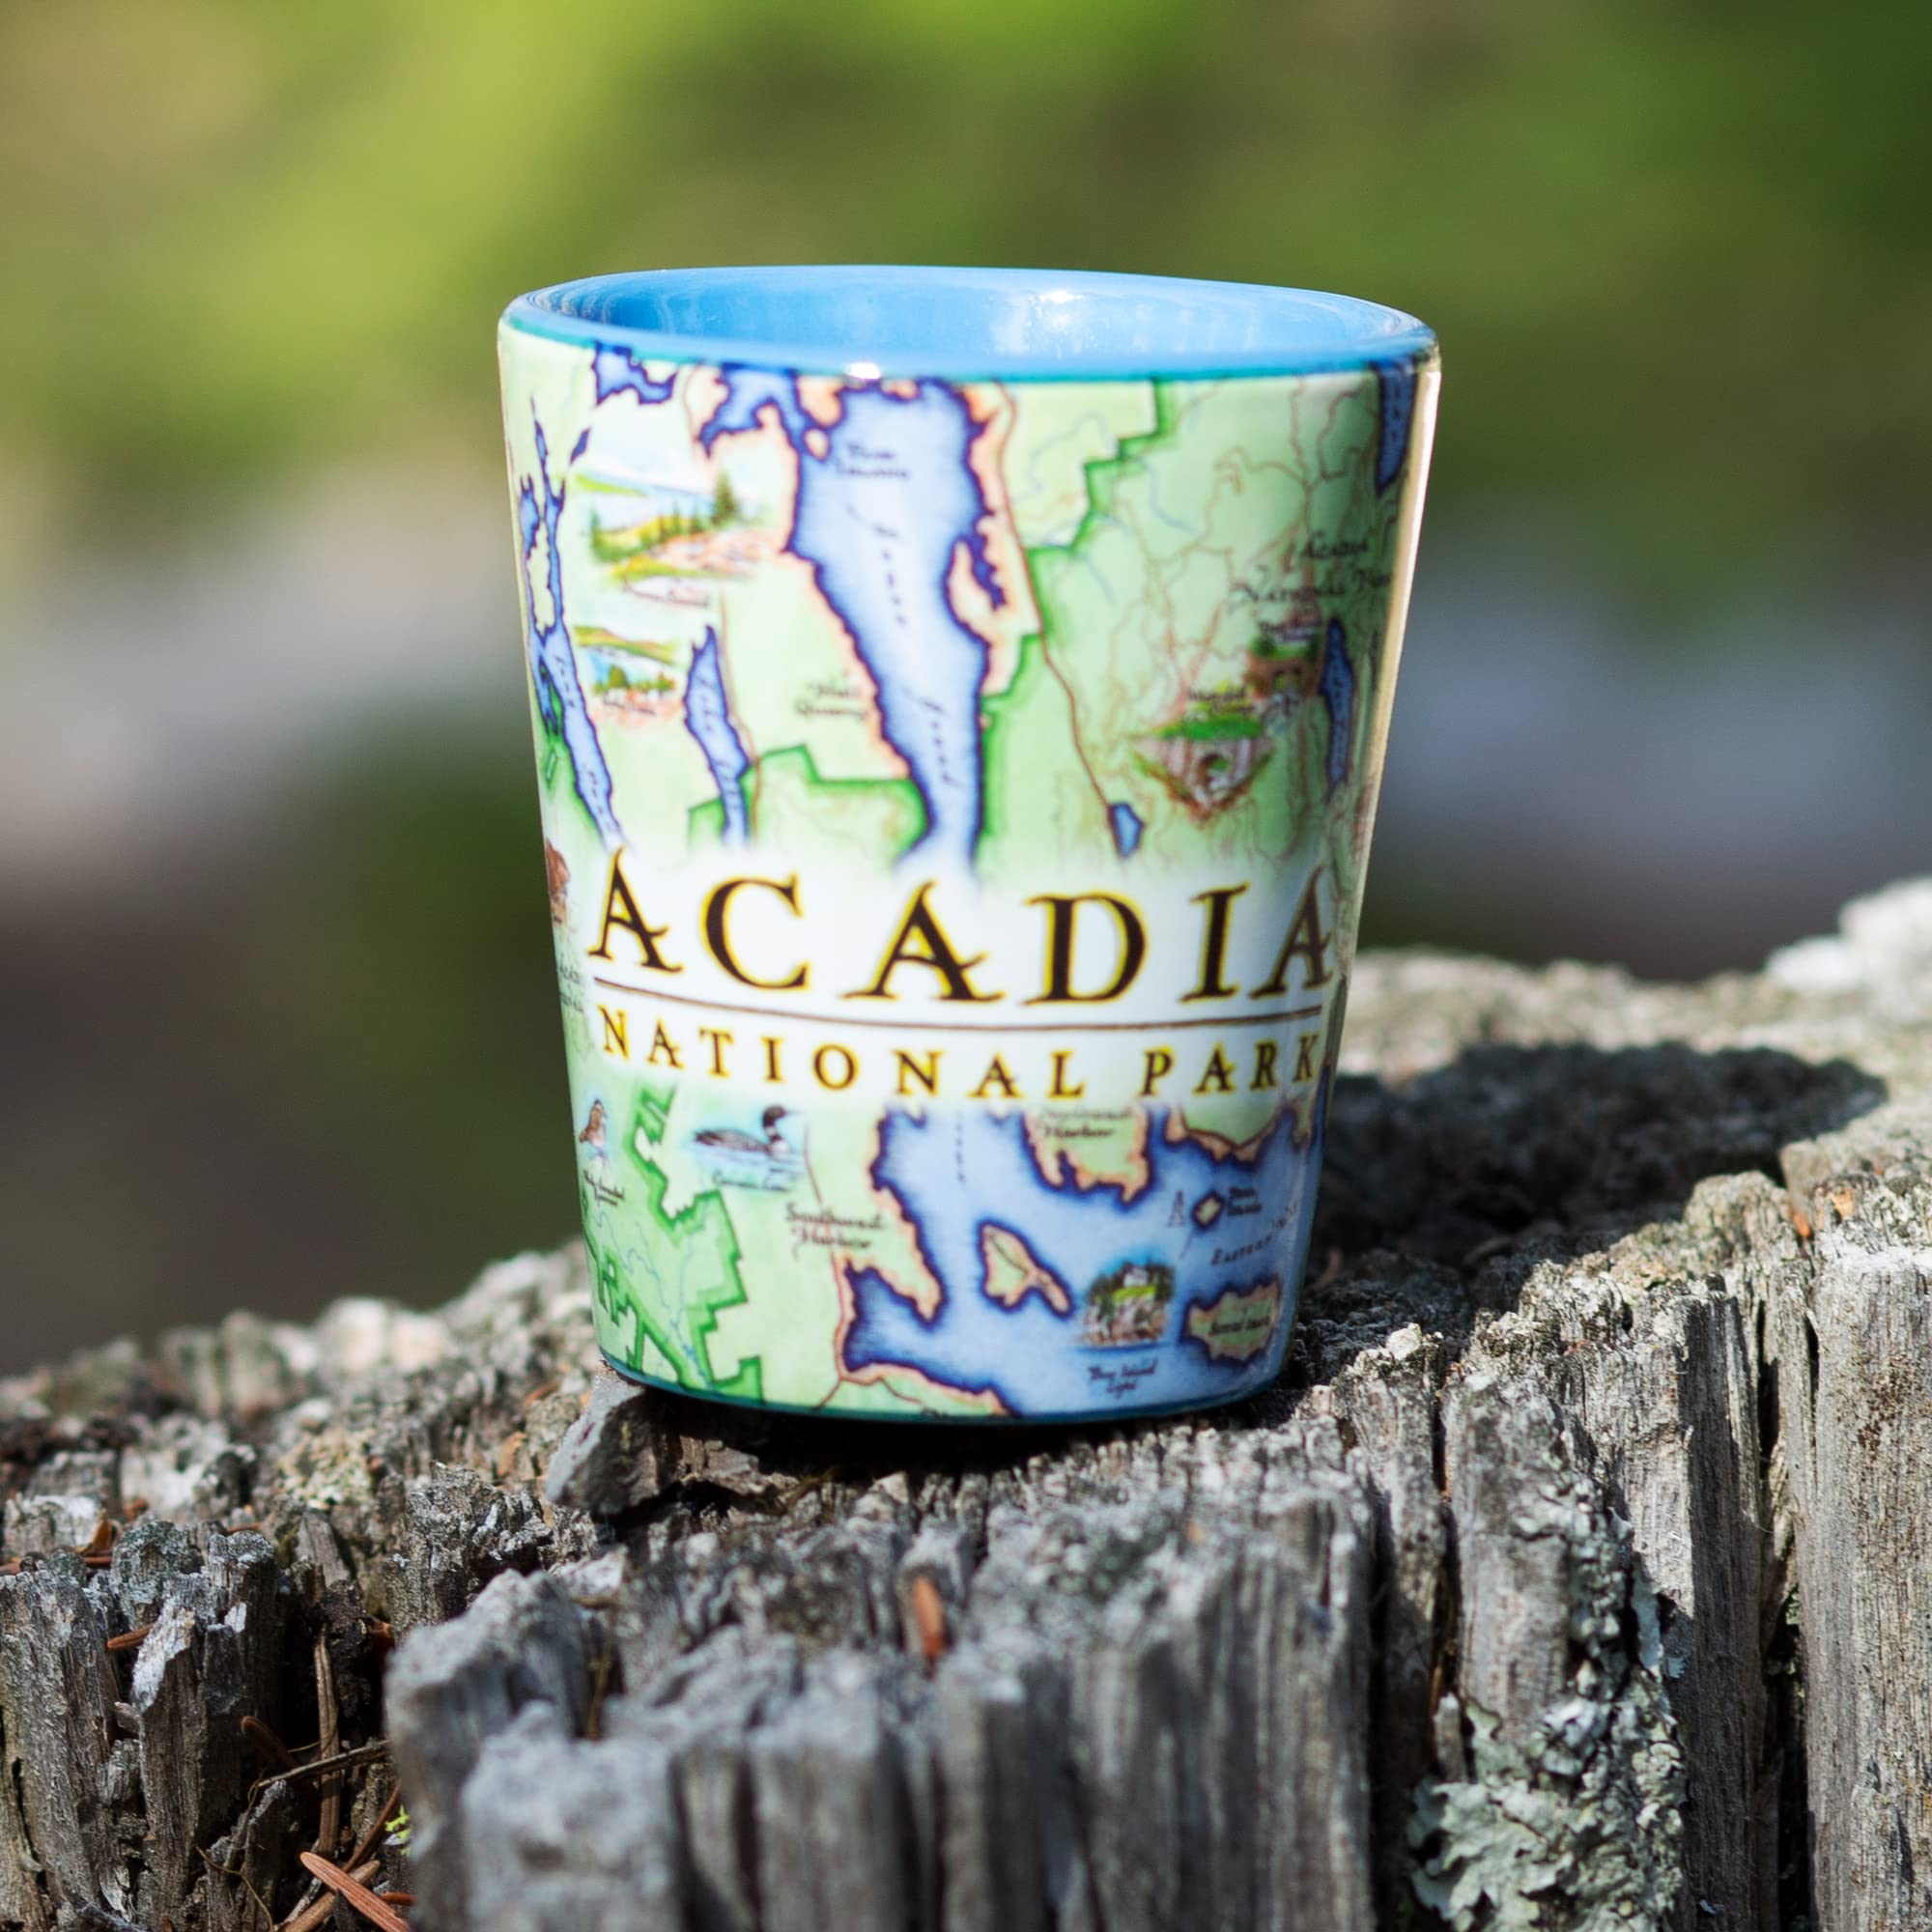 Xplorer Maps Acadia National Park Map Ceramic Shot Glass, BPA-Free - For Office, Home, Gift, Party - Durable and holds 1.5 oz liquid